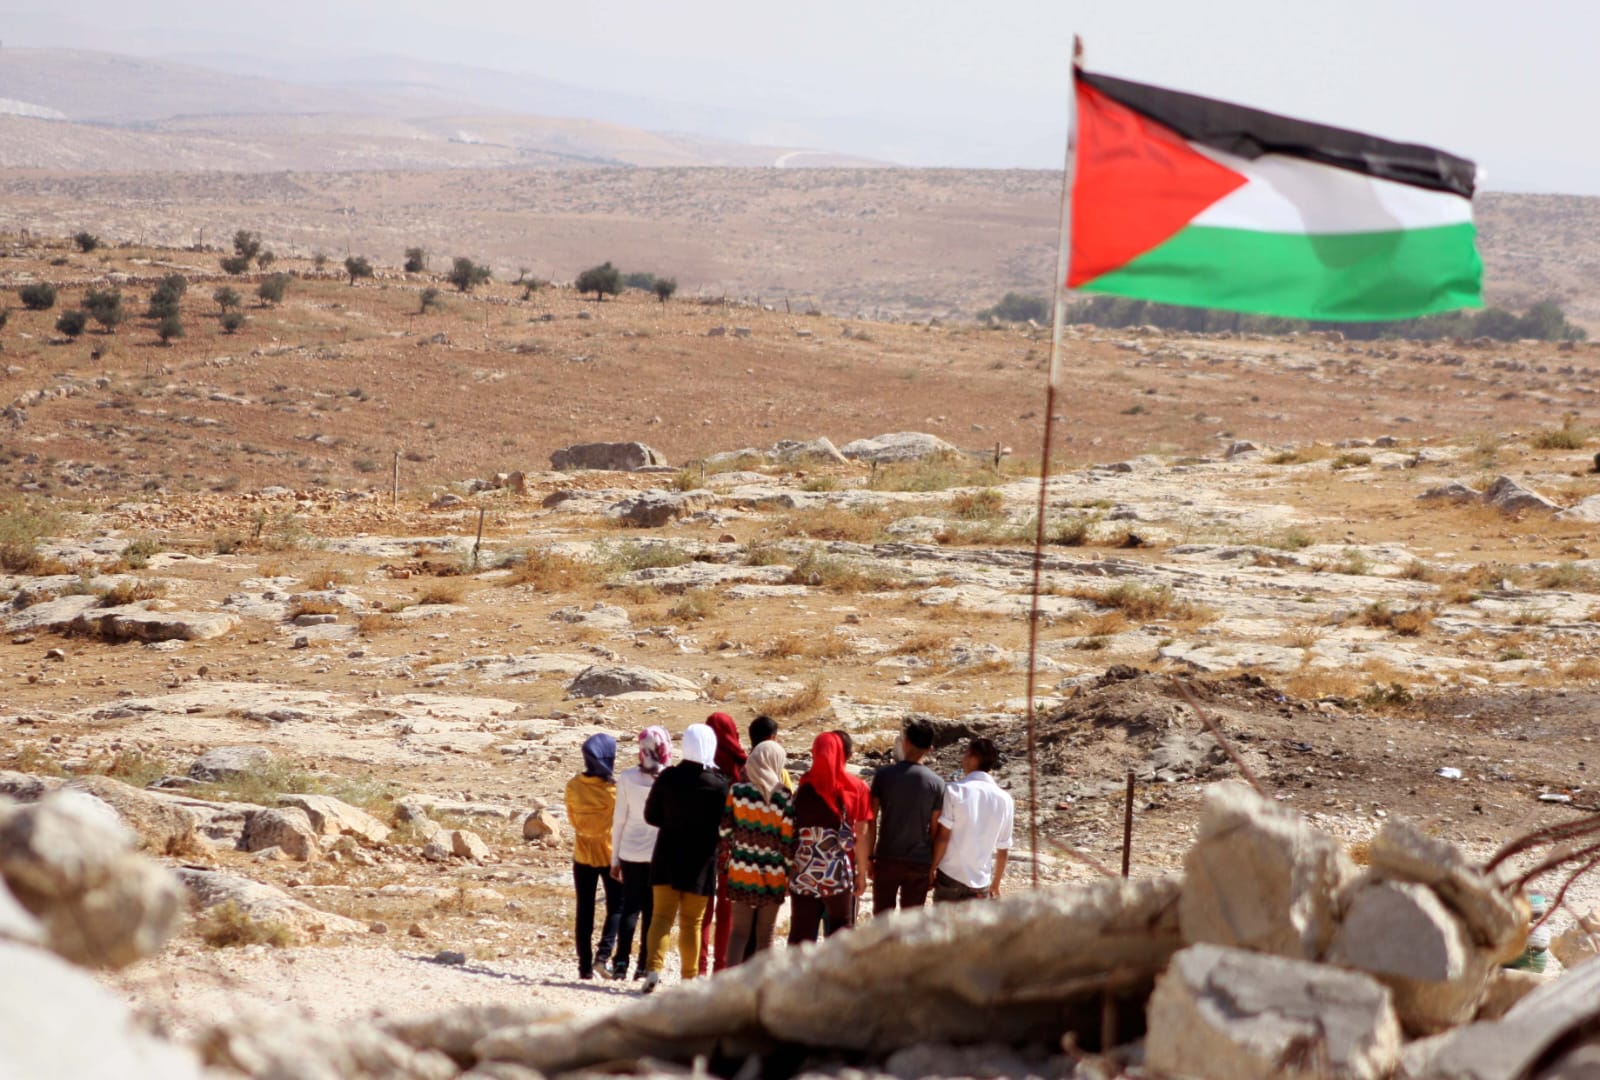 Dozens of Palestinians took part in an anti-settlement protest in al-Tuwana village and its neighboring villages in Masafer Yatta